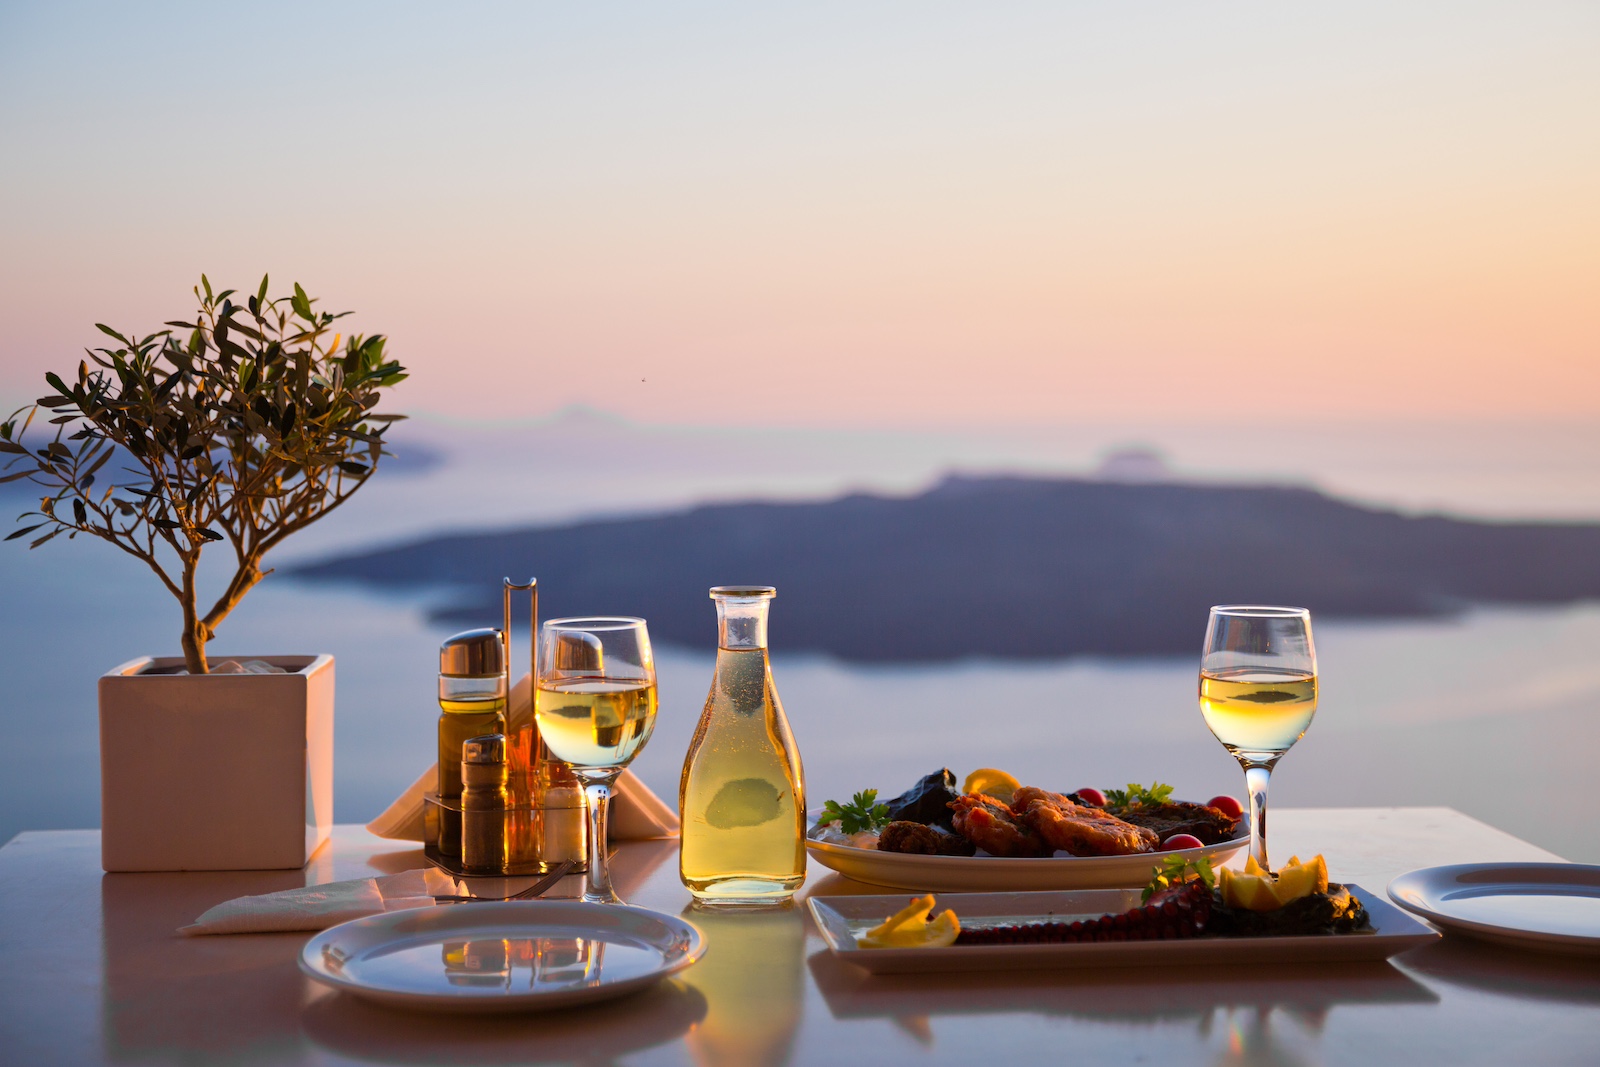 A romantic dinner setting overlooking the Mediterranean Sea at sunset